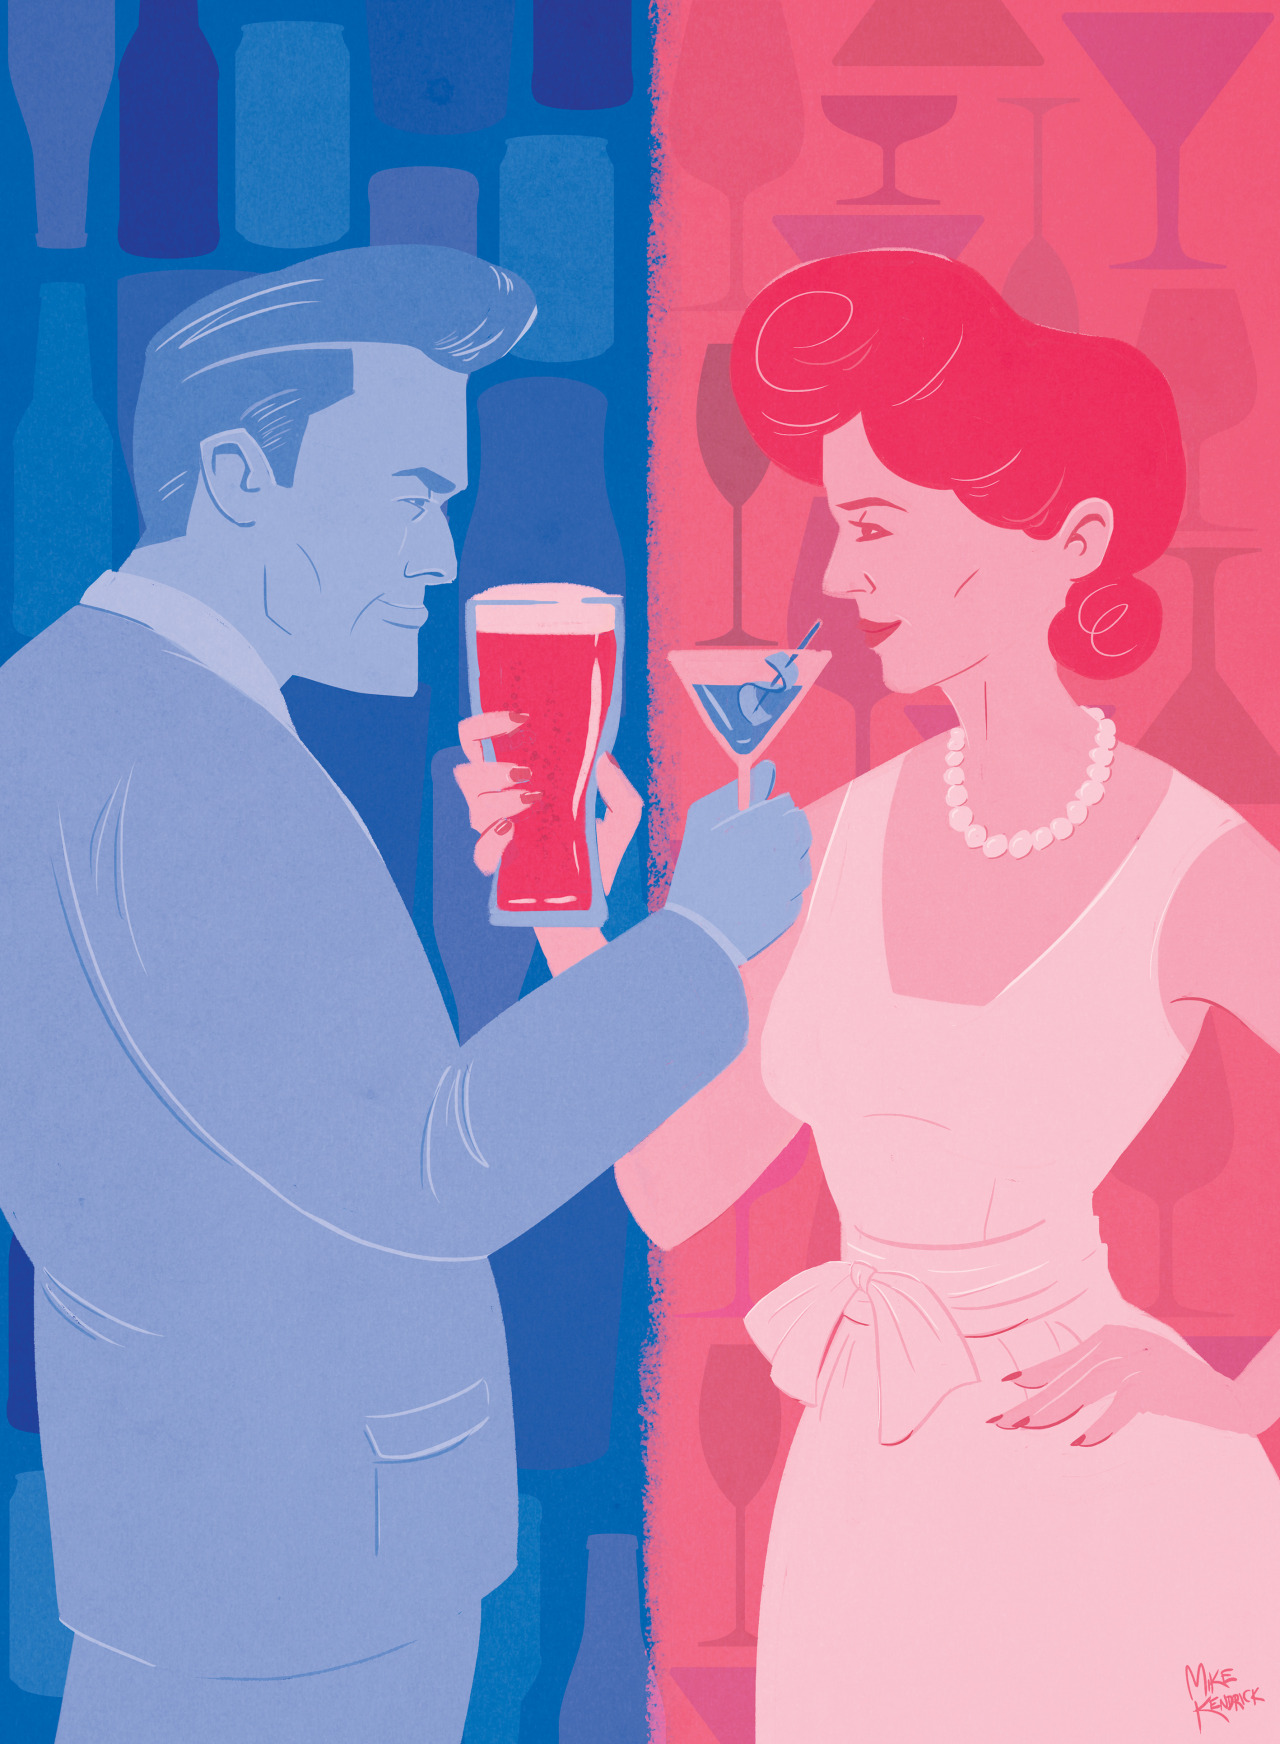 Gender Roles in Drinking Culture